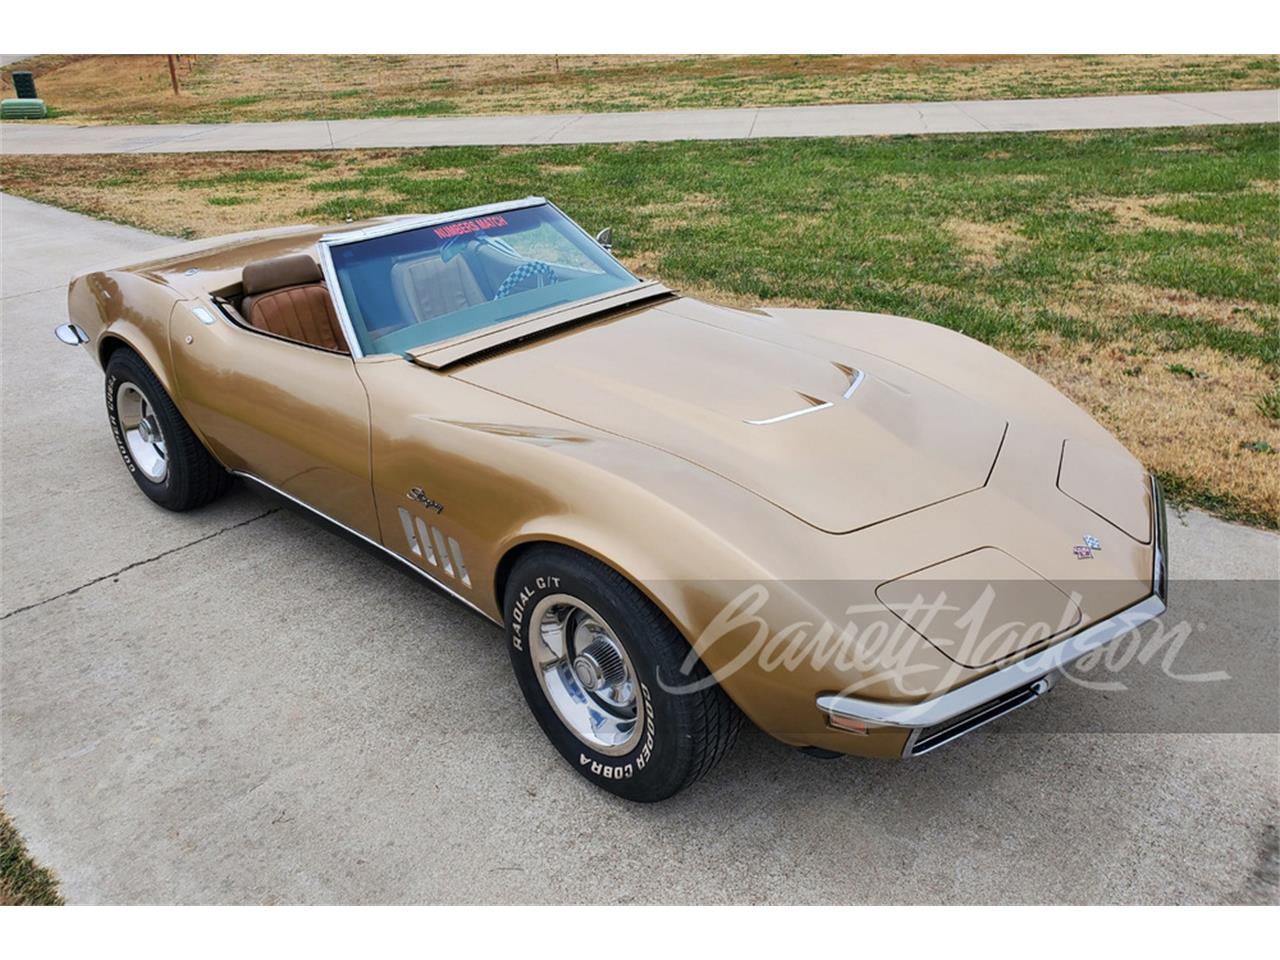 For Sale at Auction: 1969 Chevrolet Corvette in Scottsdale, Arizona for sale in Scottsdale, AZ